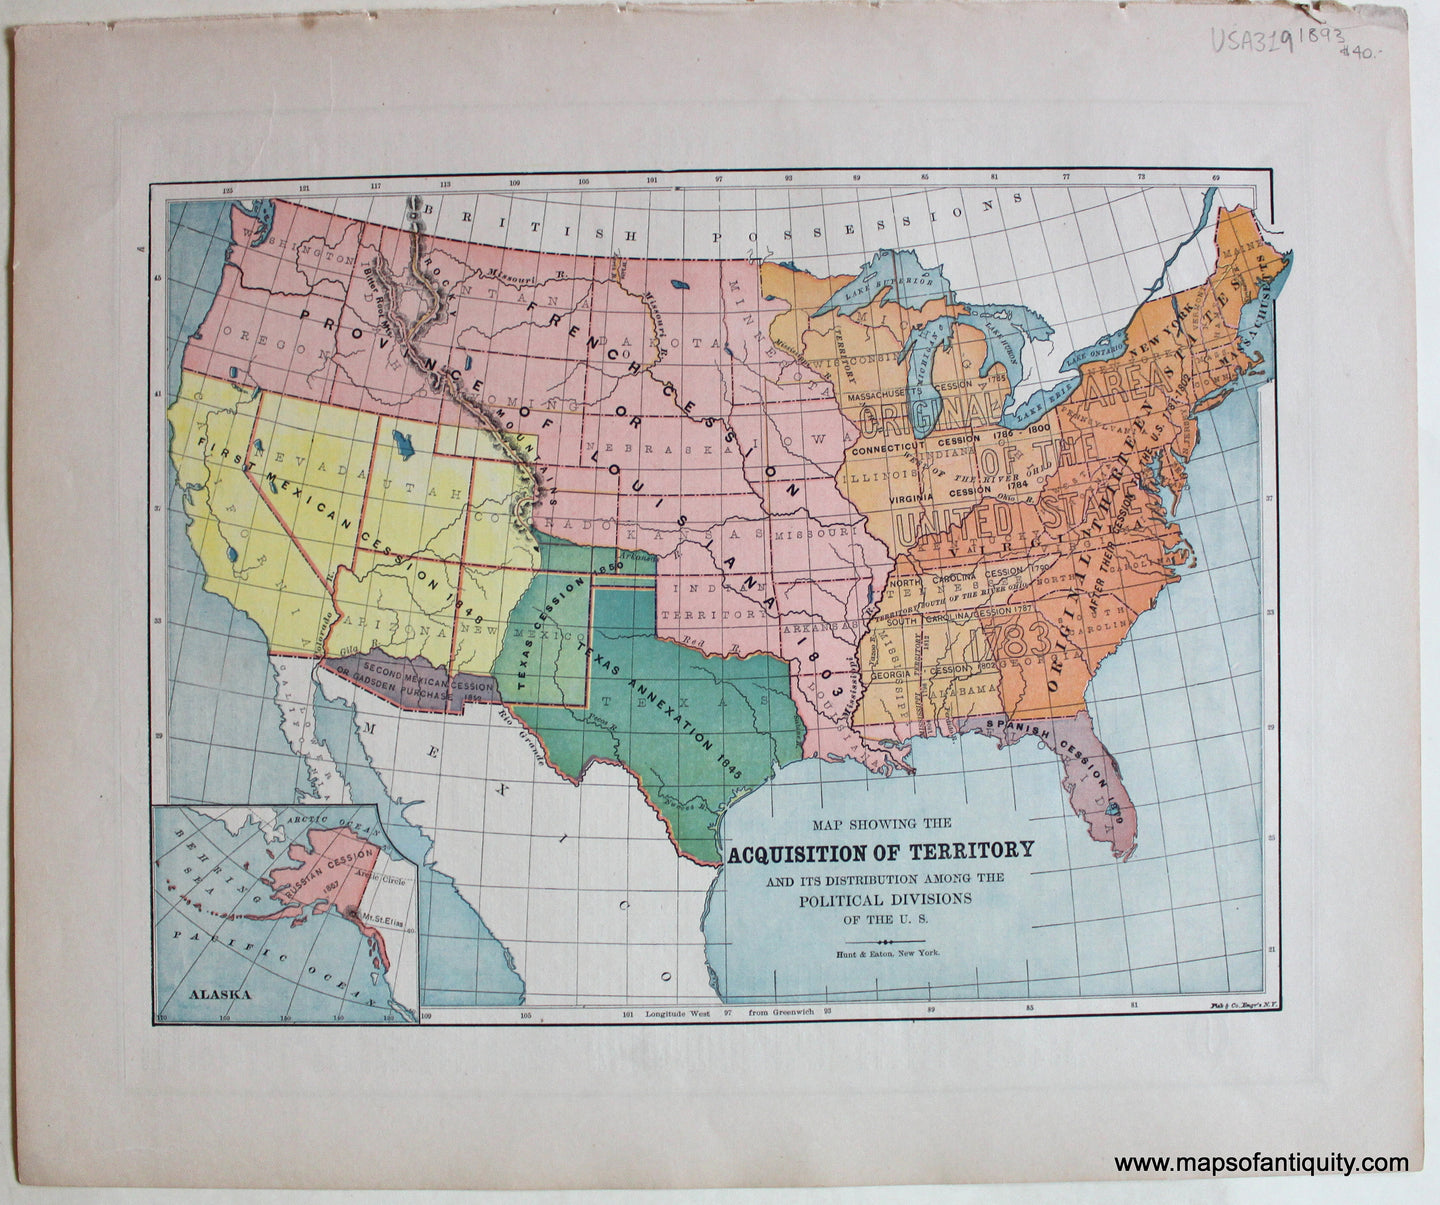 Antique-Printed-Color-Map-Map-Showing-the-Acquisition-of-Territory-and-its-Distribution-Among-the-Political-Divisions-of-the-U.S.-1893-Hunt-&-Eaton-United-States-General-1800s-19th-century-Maps-of-Antiquity